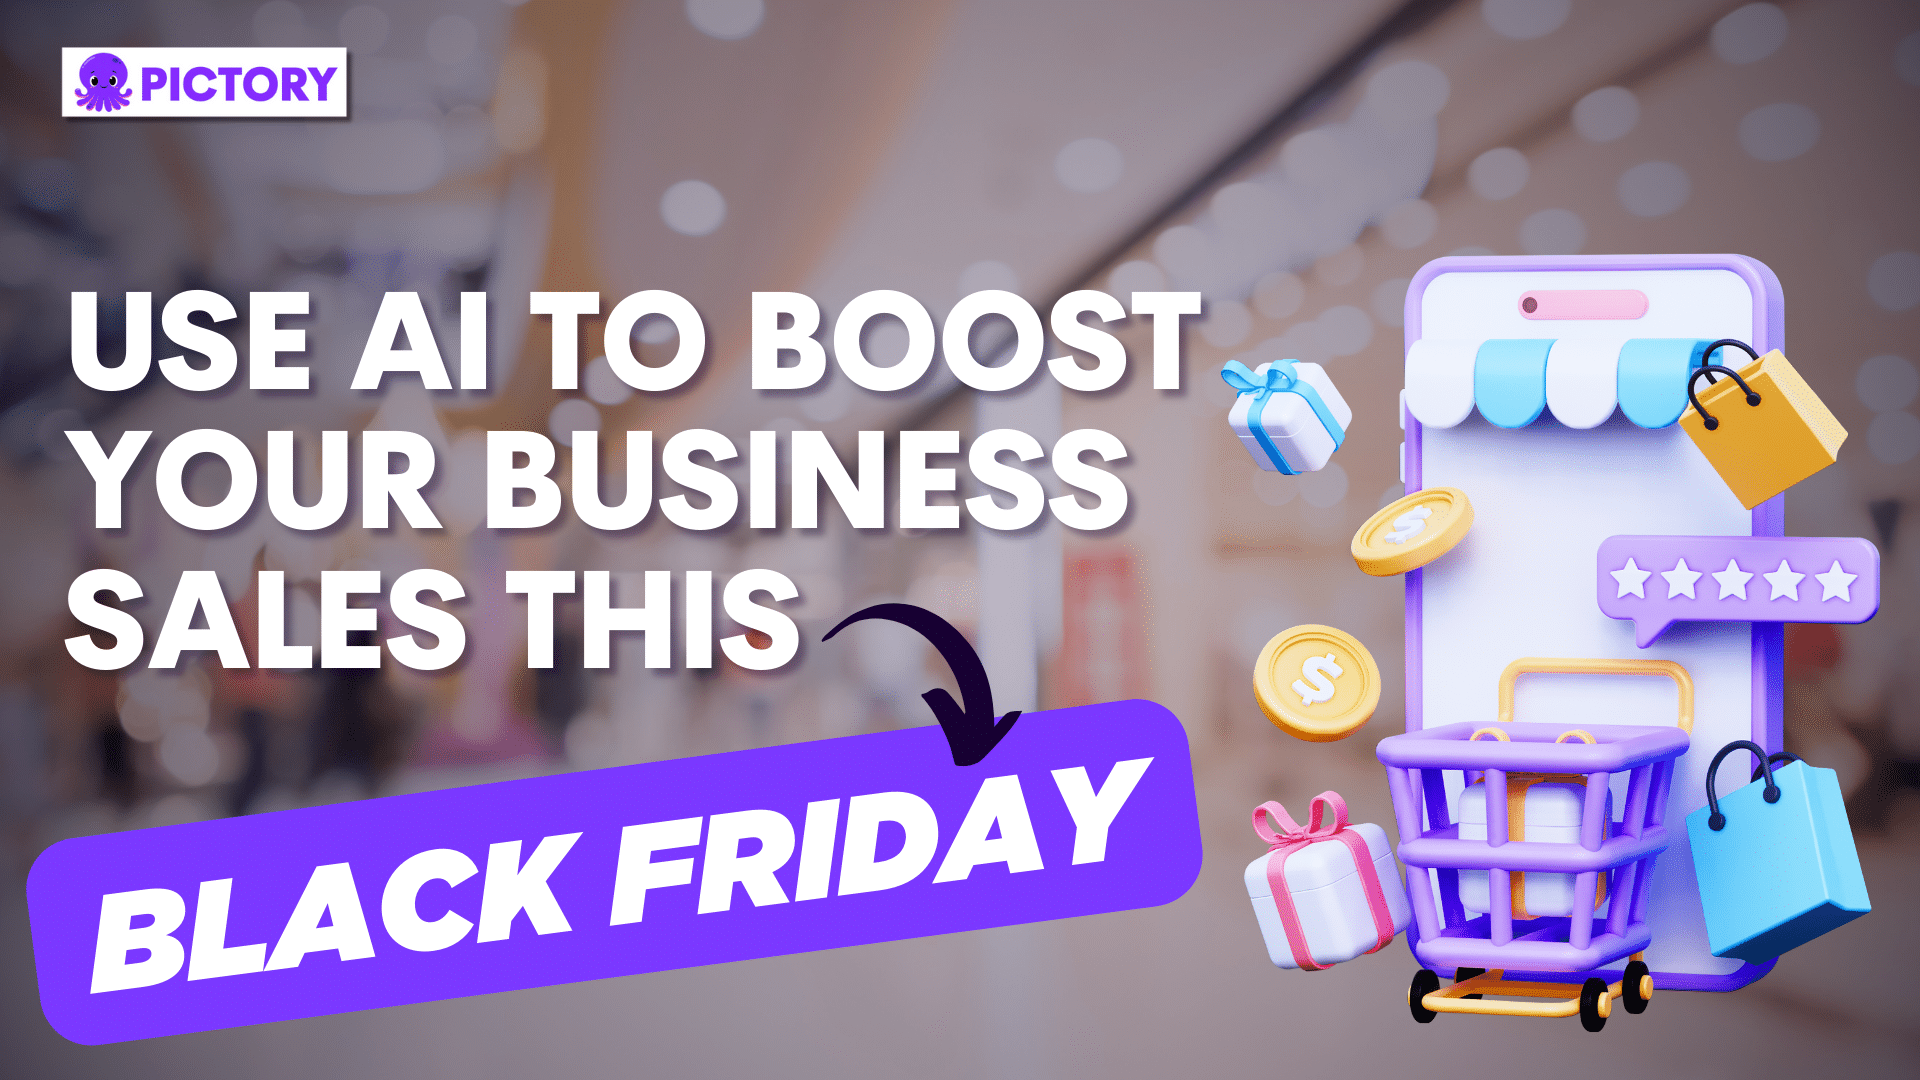 Use AI to Boost Your Business Sales this Black Friday/Cyber Monday